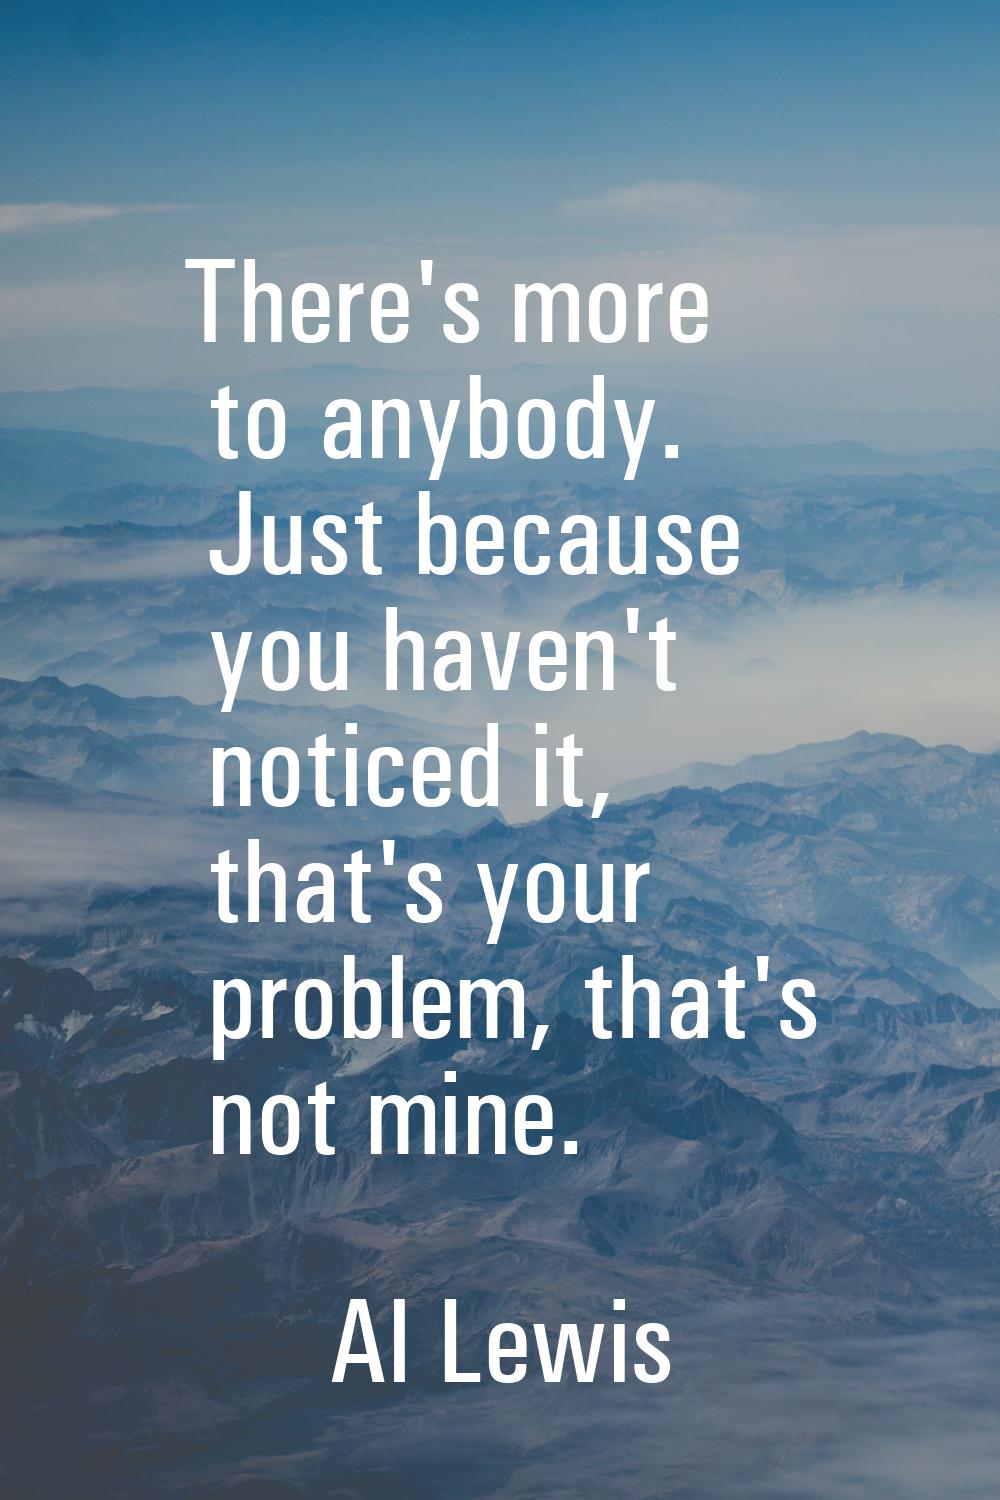 There's more to anybody. Just because you haven't noticed it, that's your problem, that's not mine.